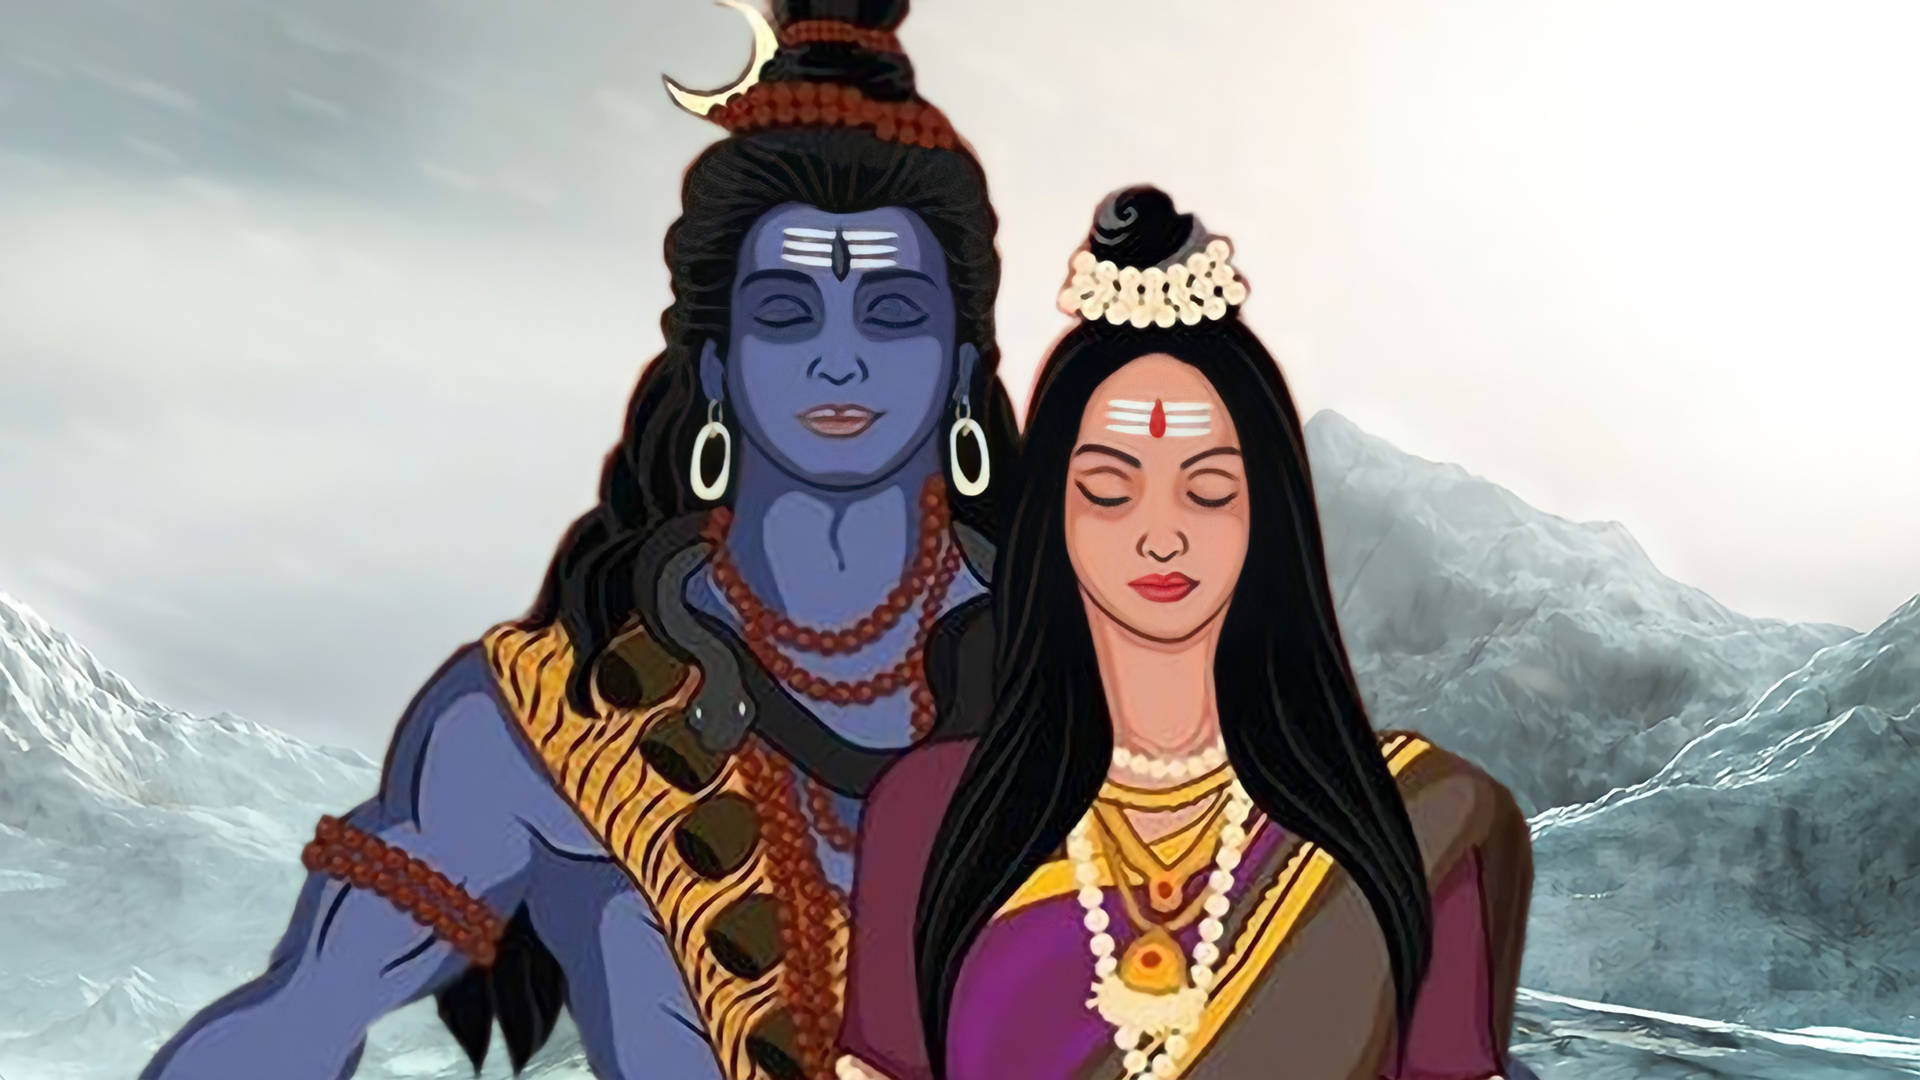 Shiv Parvati Hd Against Snowy Mountain Background